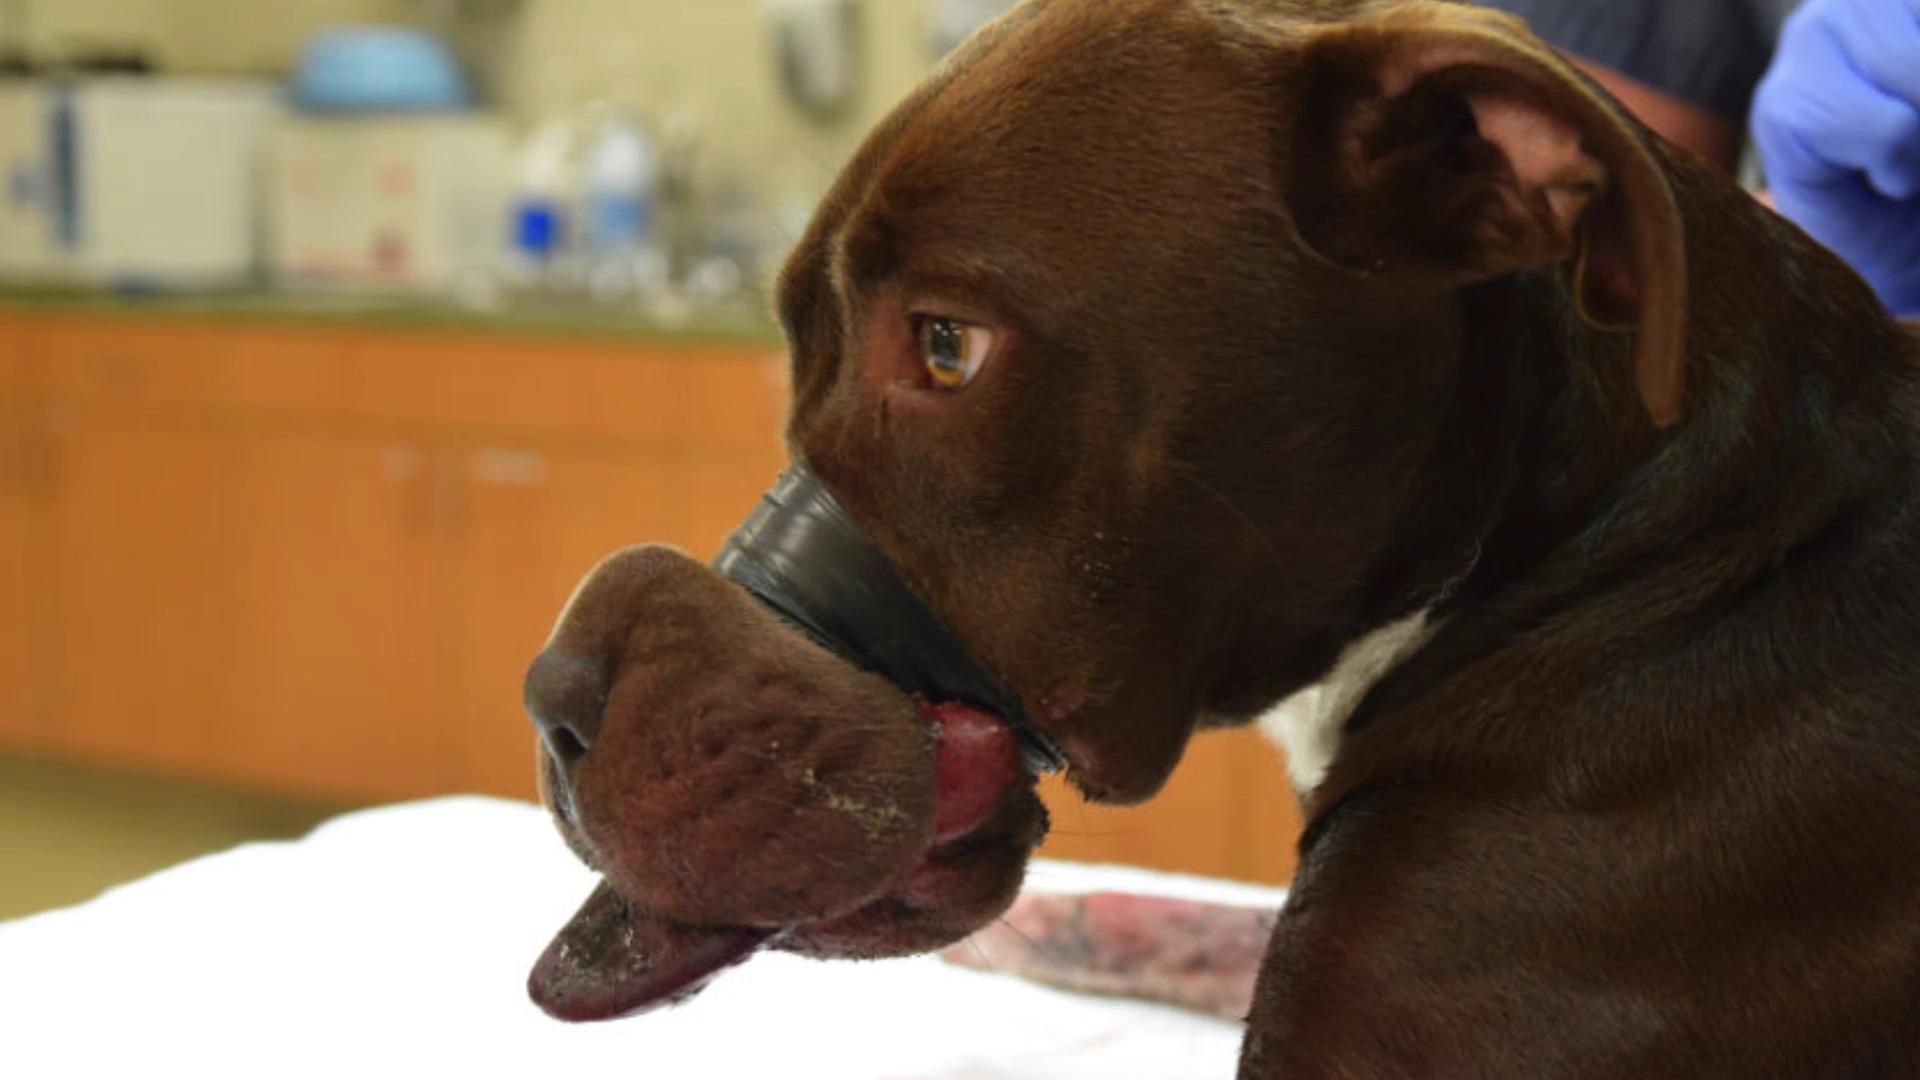 Arrest made in case of dog found with muzzle taped shut